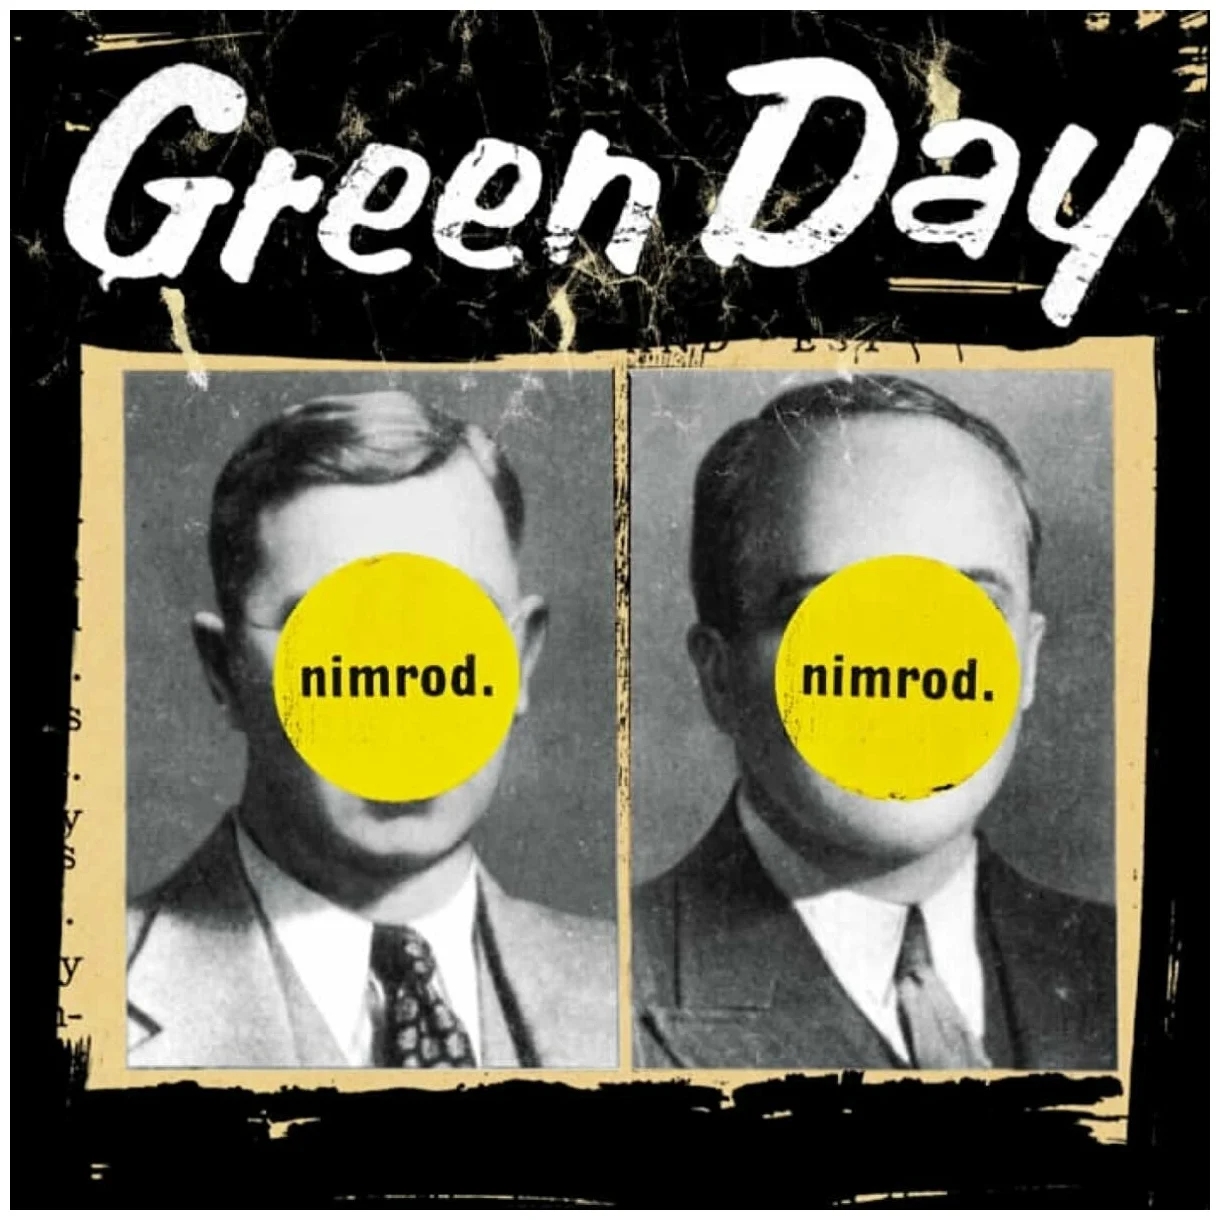 Виниловая Пластинка Green Day, Nimrod (0093624873006) the rolling stones no filter tour live in london limited edition 4xcd box set